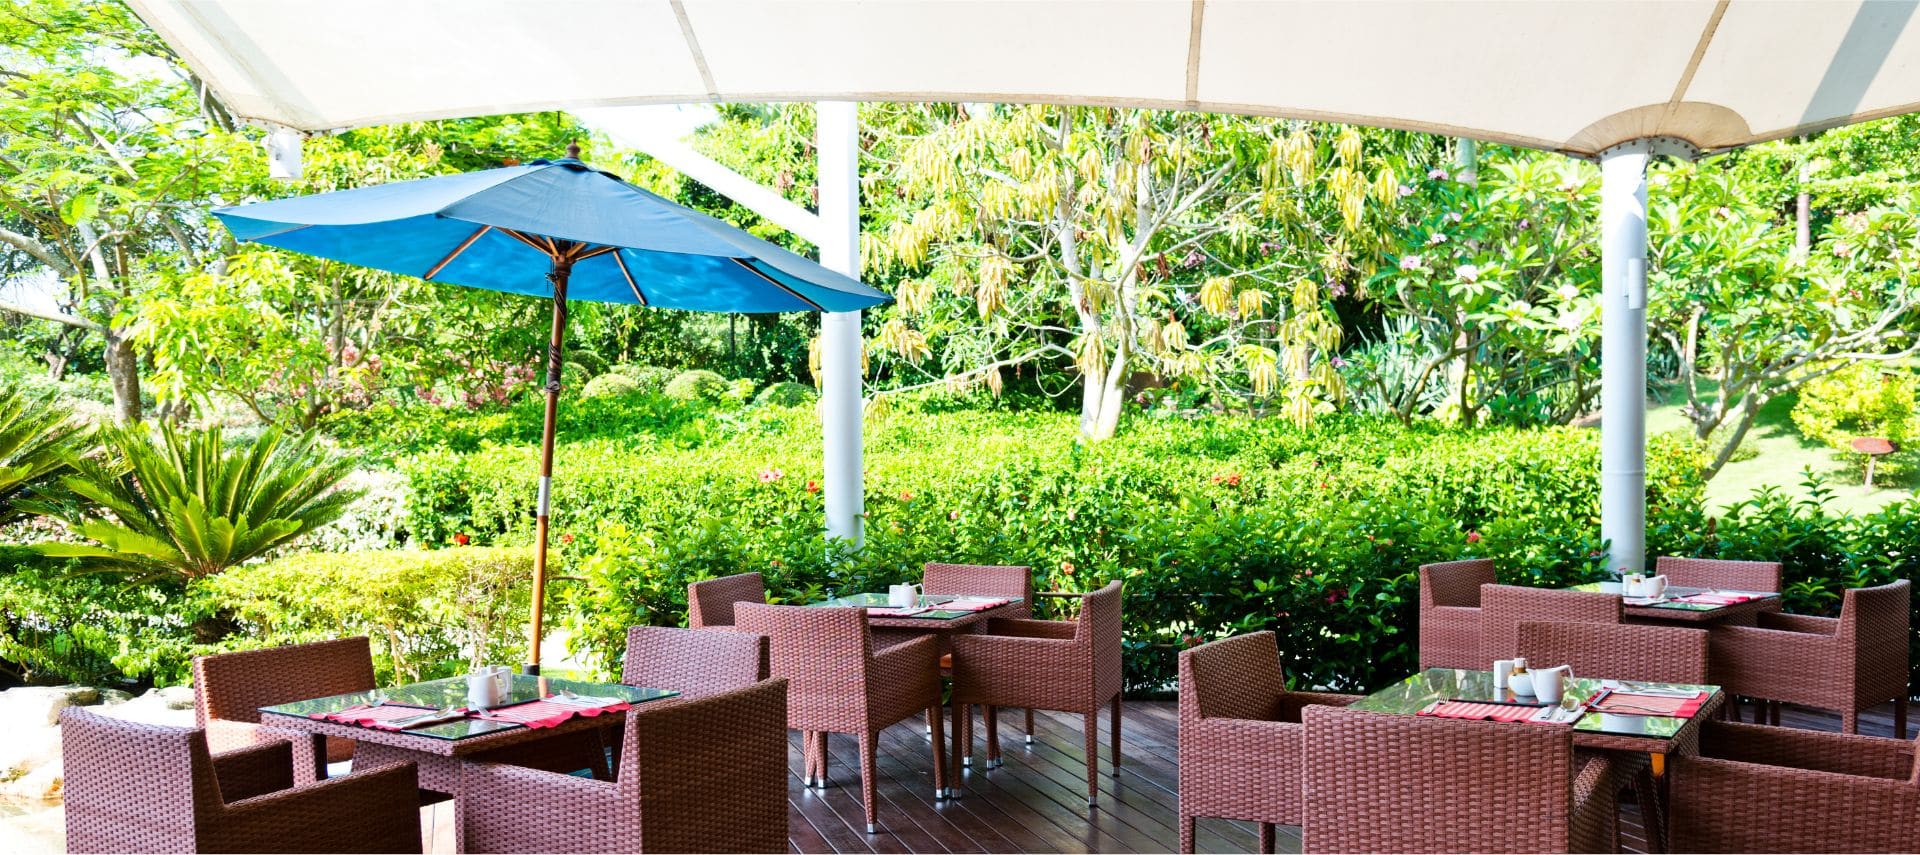 A group of tables on a green outdoor patio, one with a blue umbrella and a cream sail cover over all the tables.